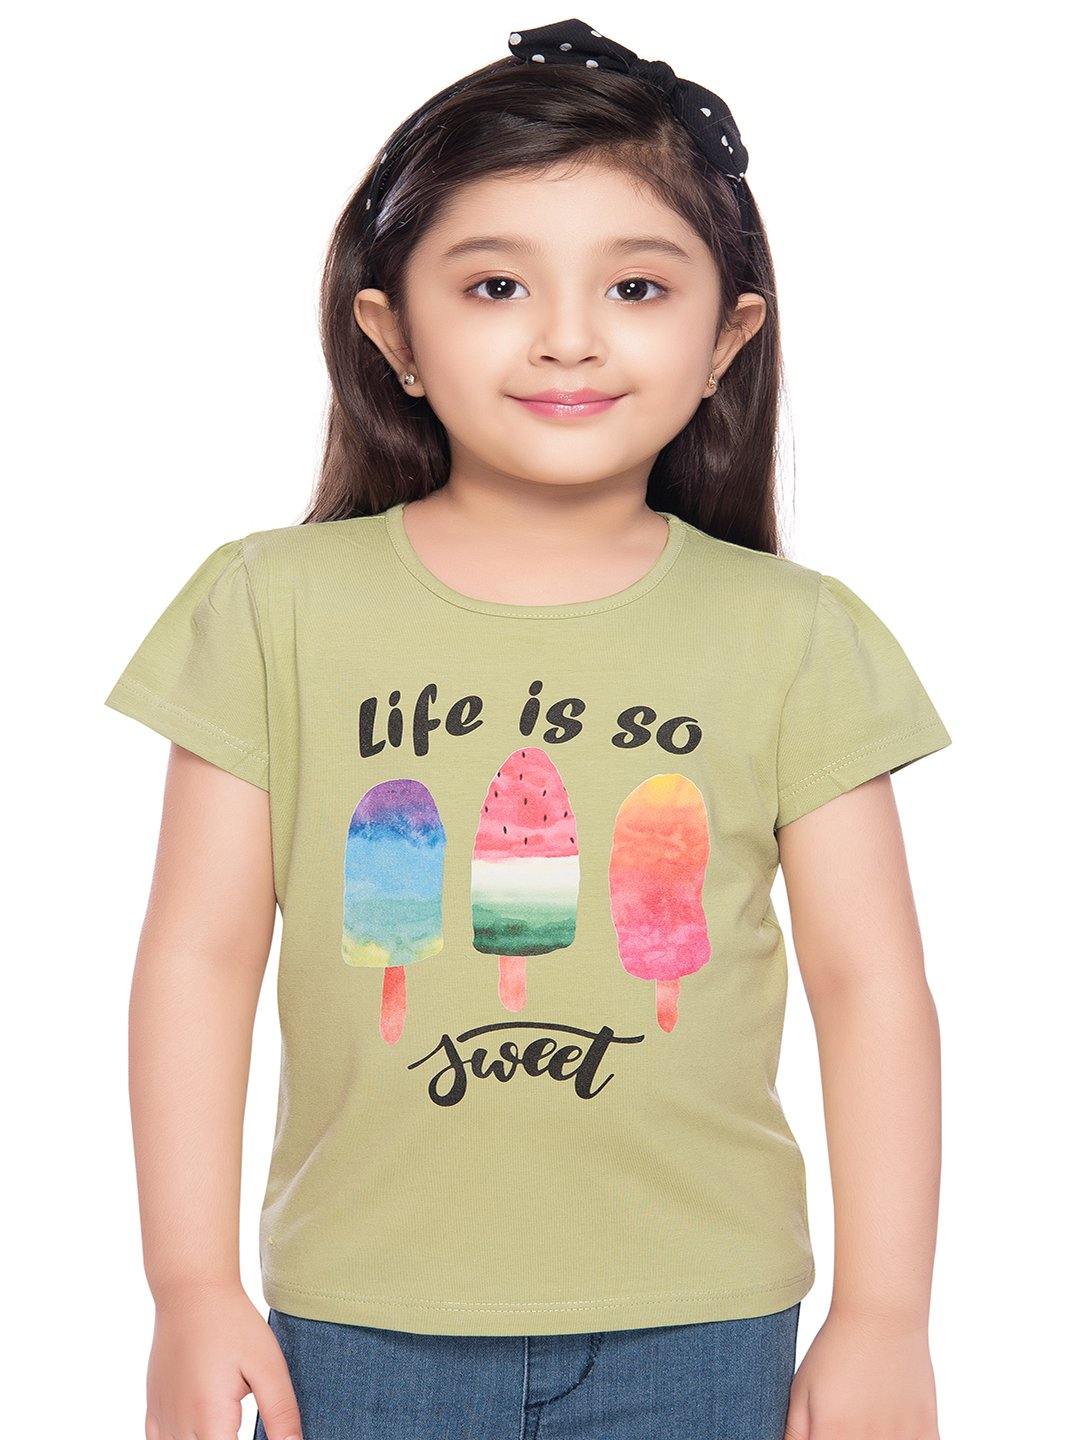 Tiny Baby Green Colored Top - T-108Green - TINY BABY INDIA shop.tinybaby.in